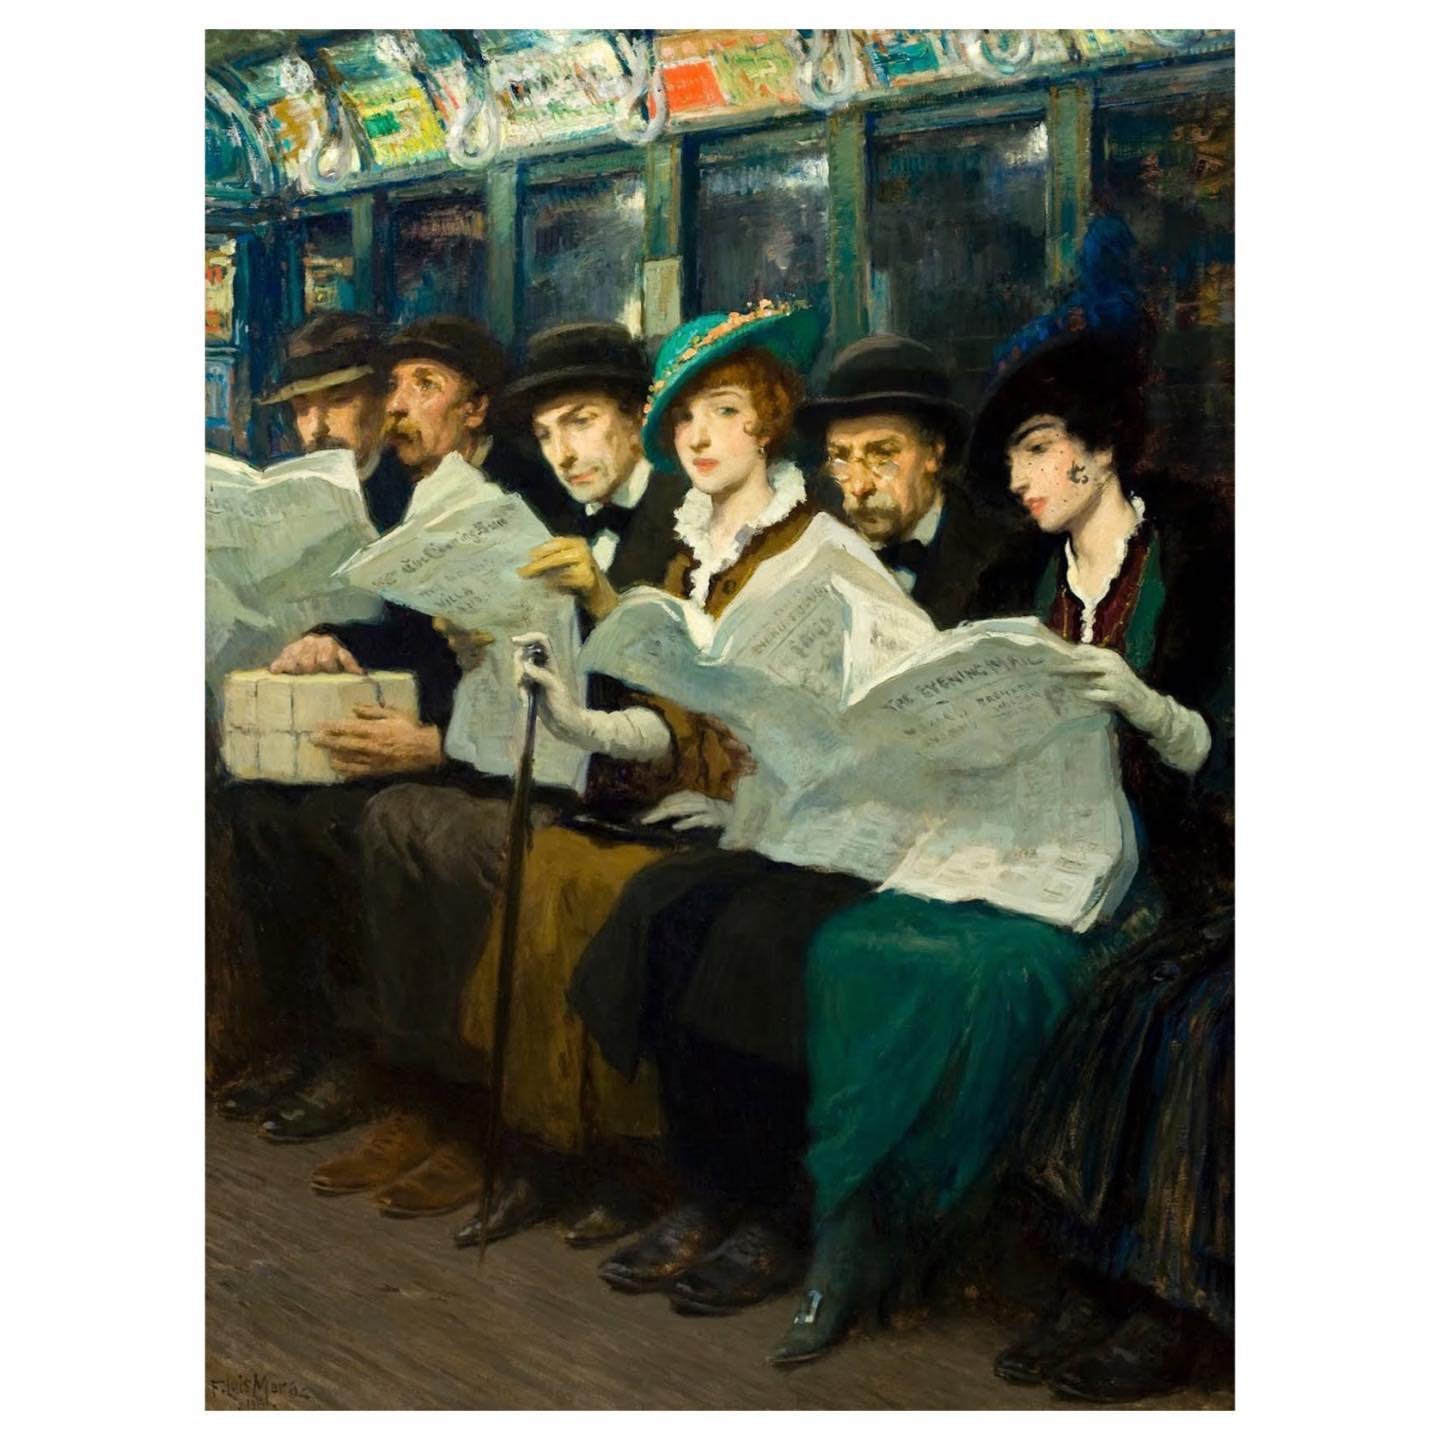 Subway Riders in New York City. F. Luis Mora, 1910.

Inspo sent from a friend!!